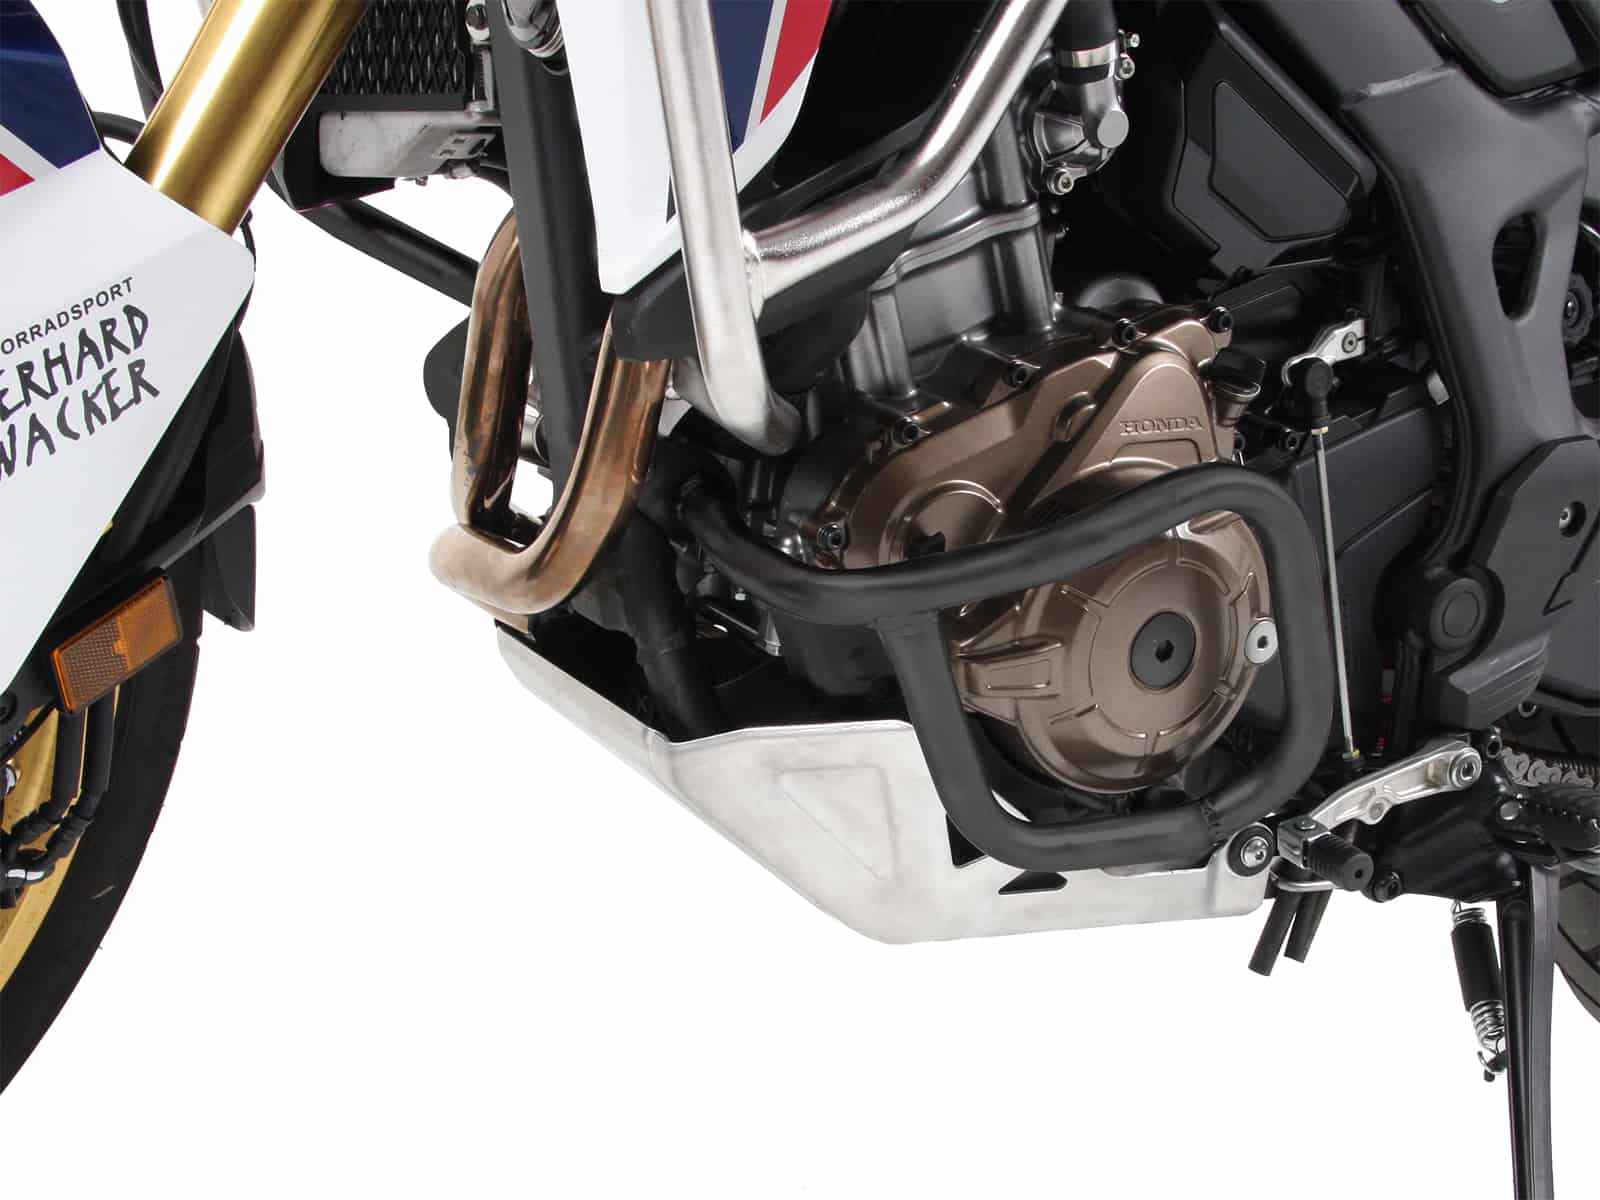 Engine protection bar black for Honda CRF 1000 Africa Twin (2016-2017)